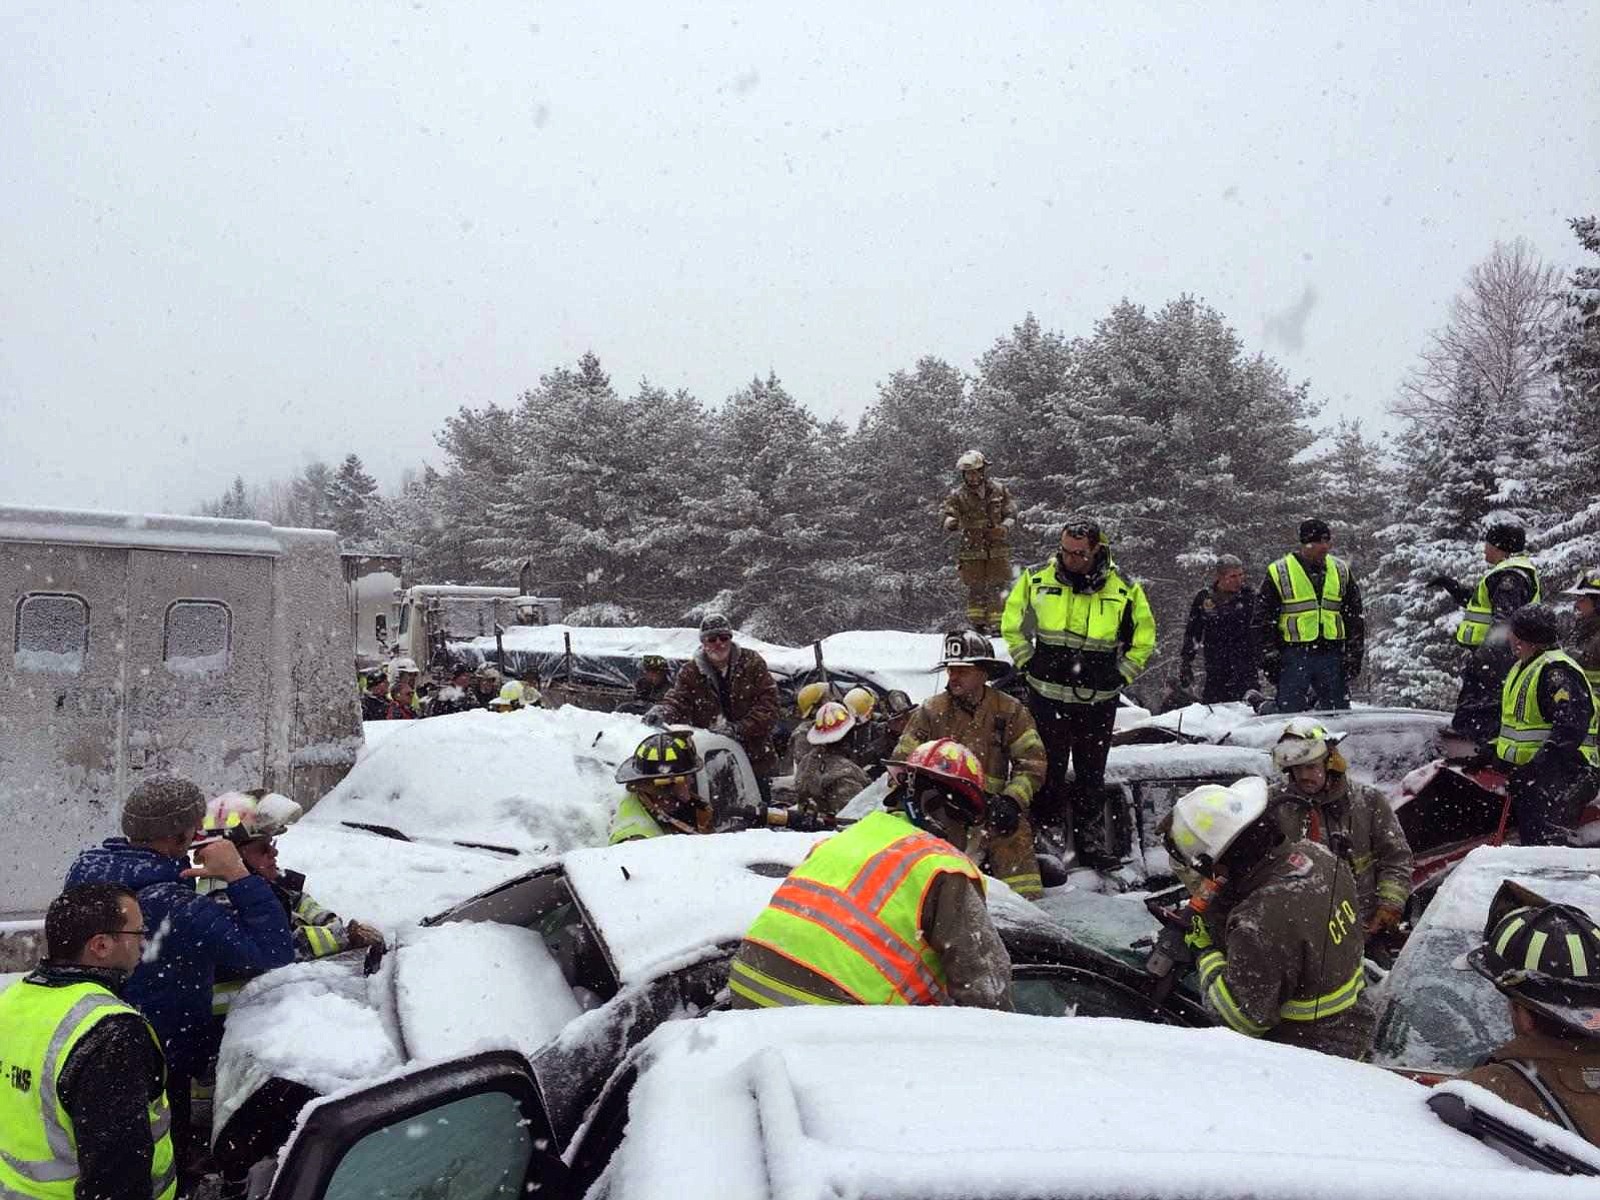 Emergency personnel respond to a multivehicle pileup on Interstate 95 near Bangor, Maine, on Wednesday.